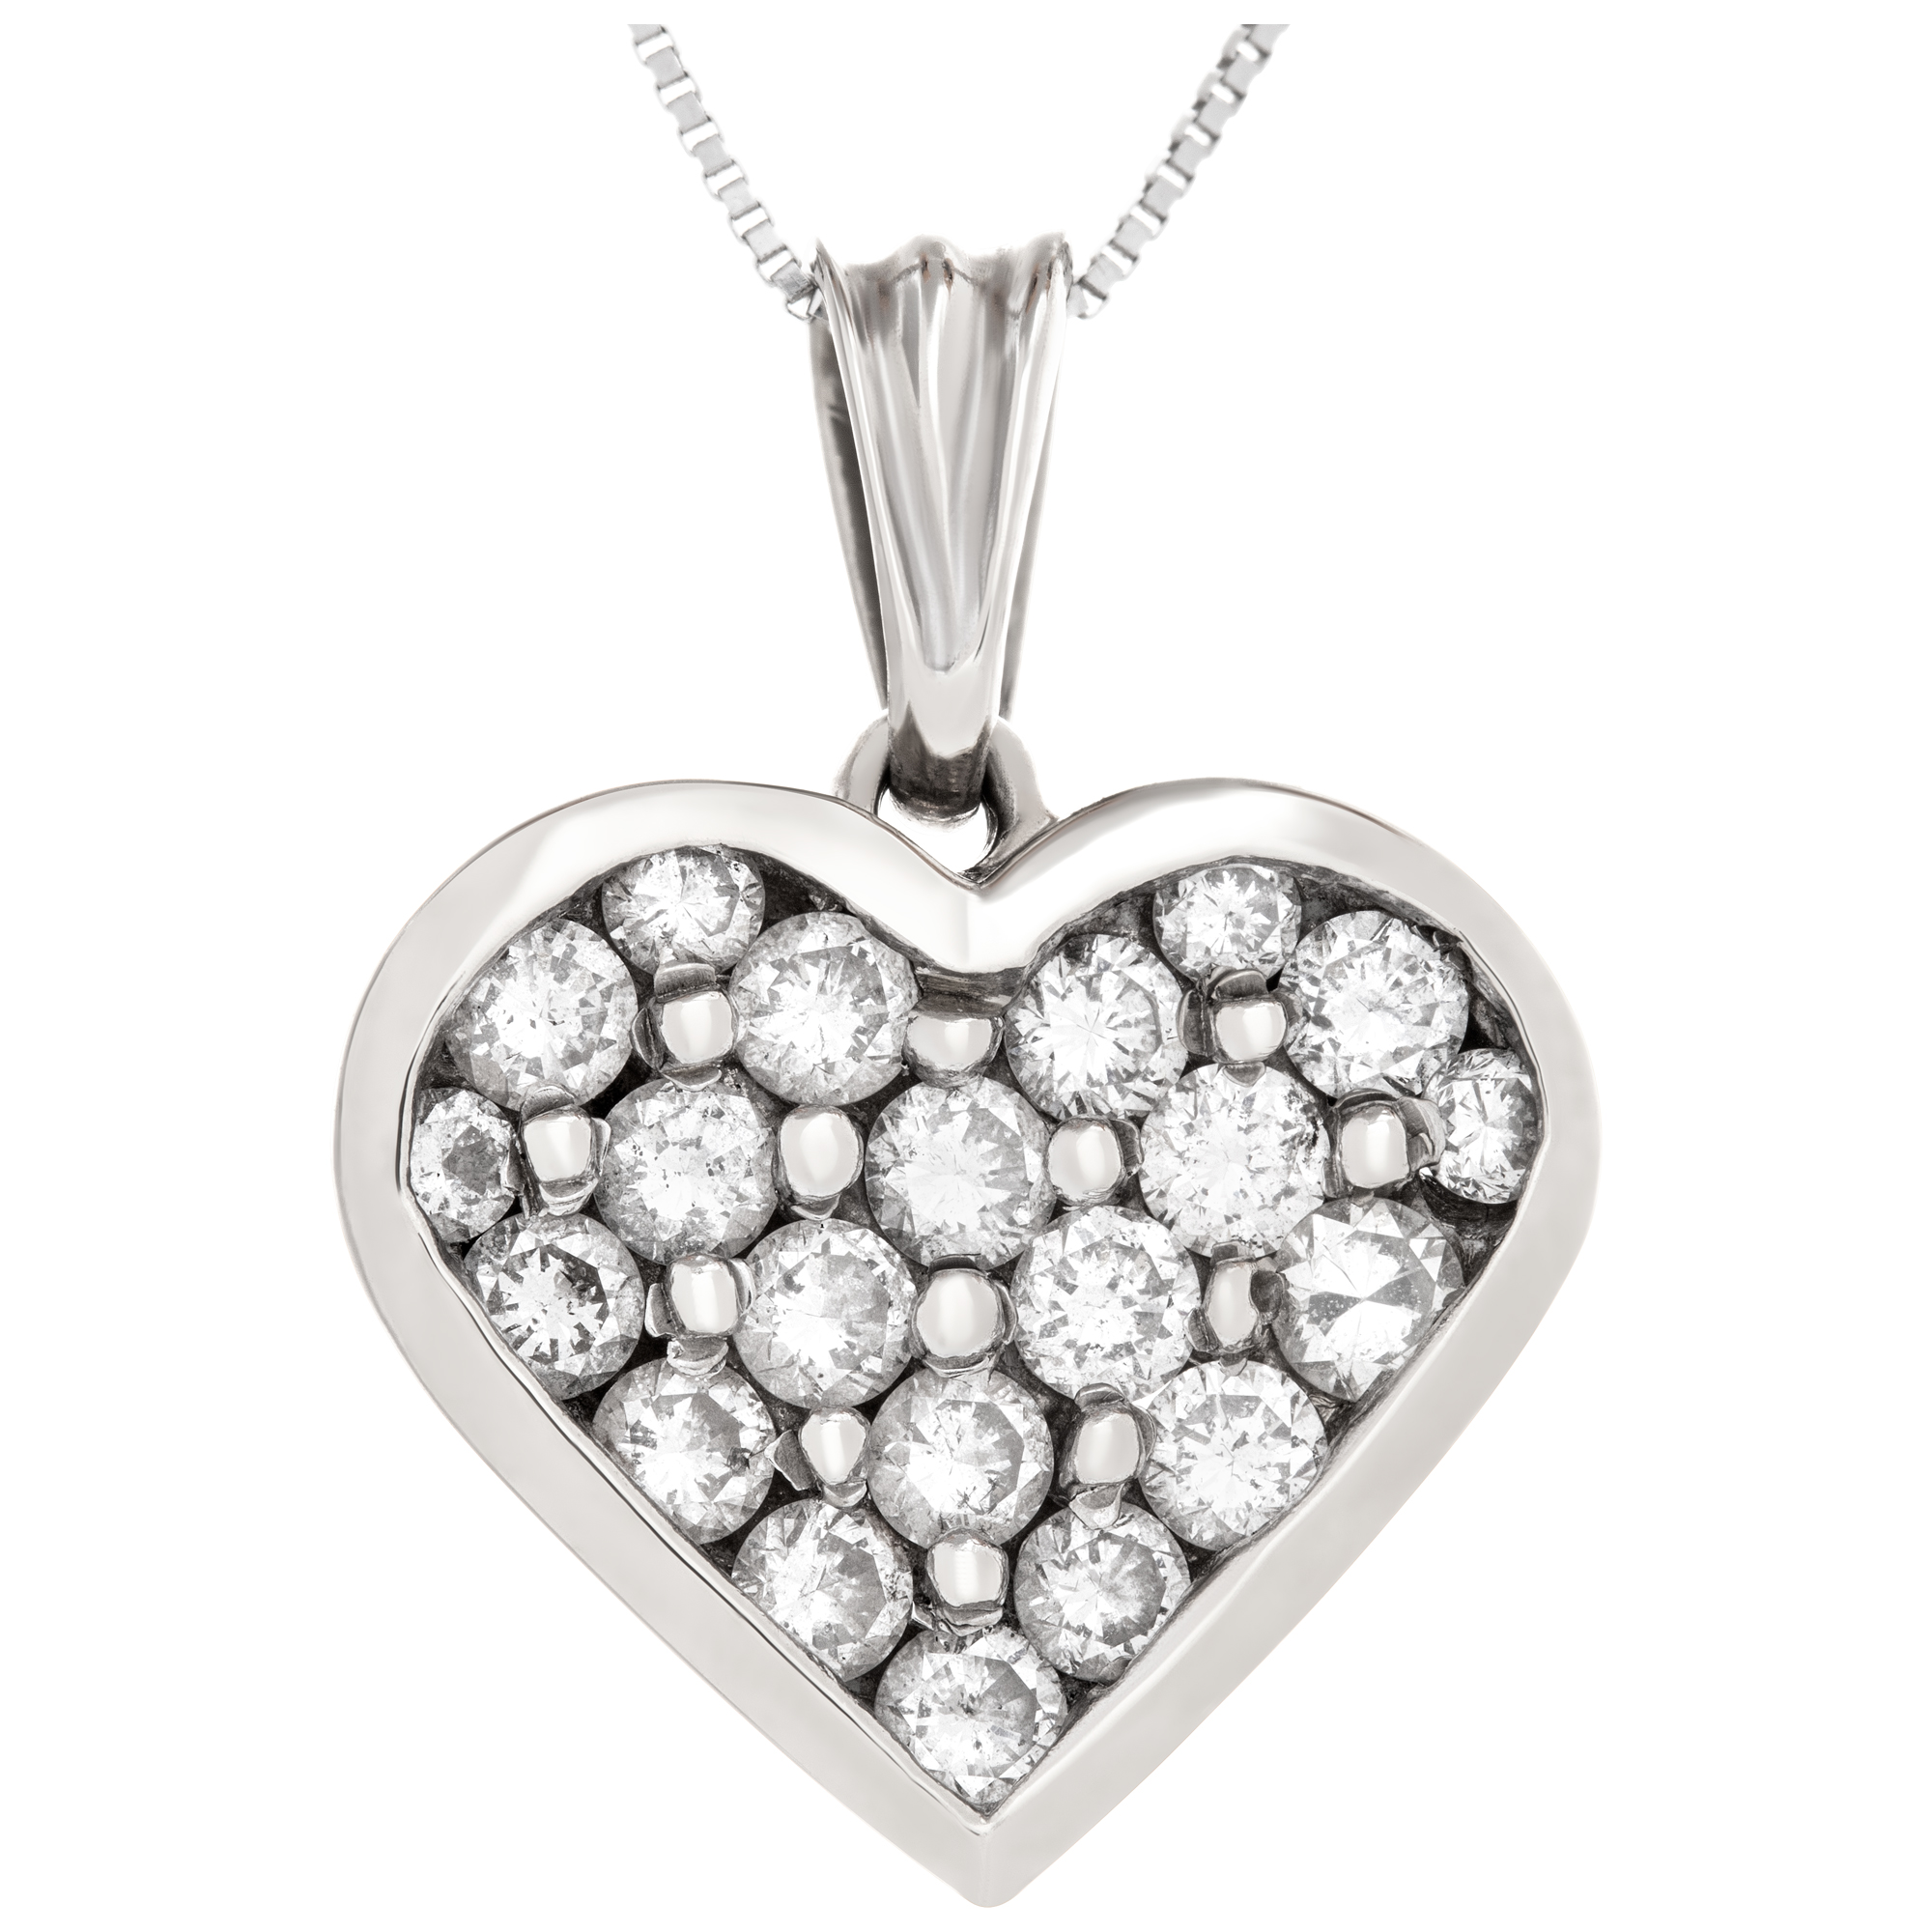 Diamond heart necklace in 14k white gold image 1